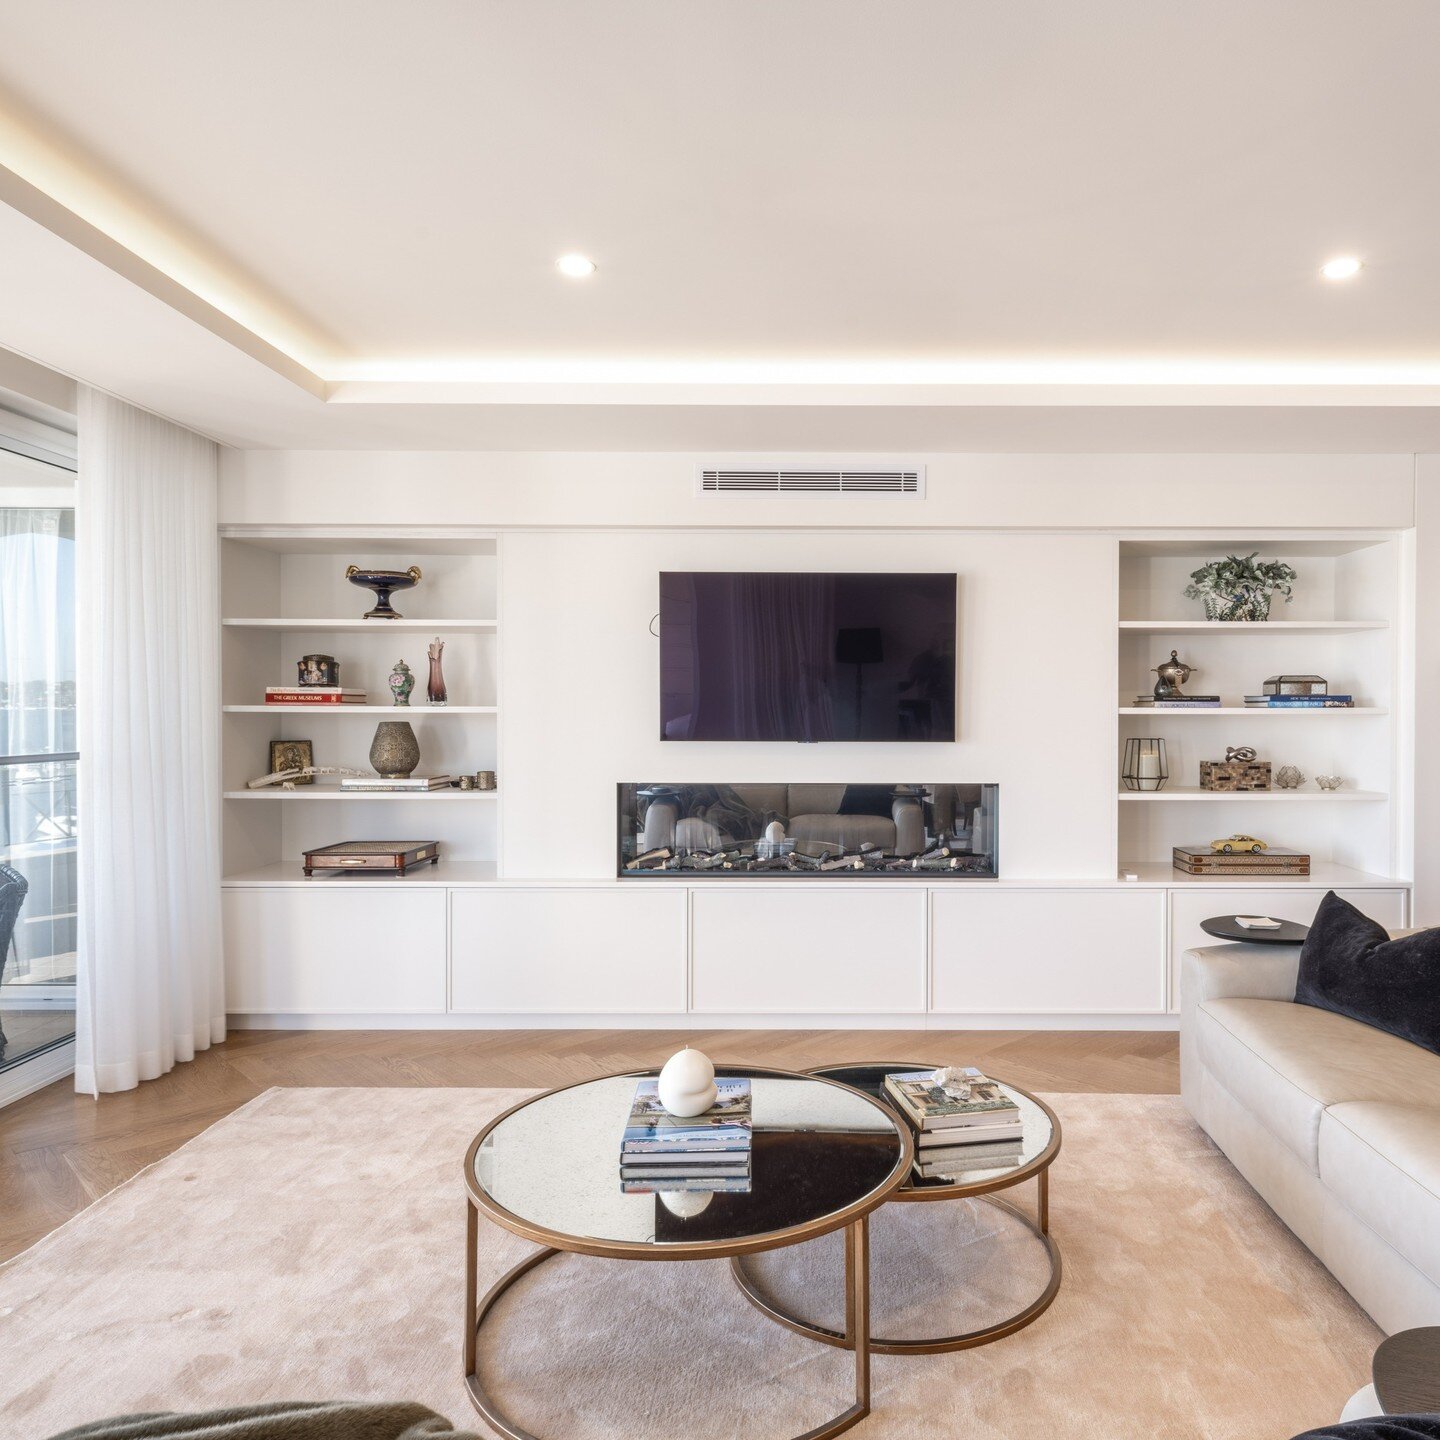 New living room with built-in joinery and fireplace for this penthouse renovation in Balmain. 
#homerenovation #penthouse #interiordesign #fireplace #joinery #lighting #architectdesign #homedesign #livingroom #homedecor #balmain #sydneyhomes